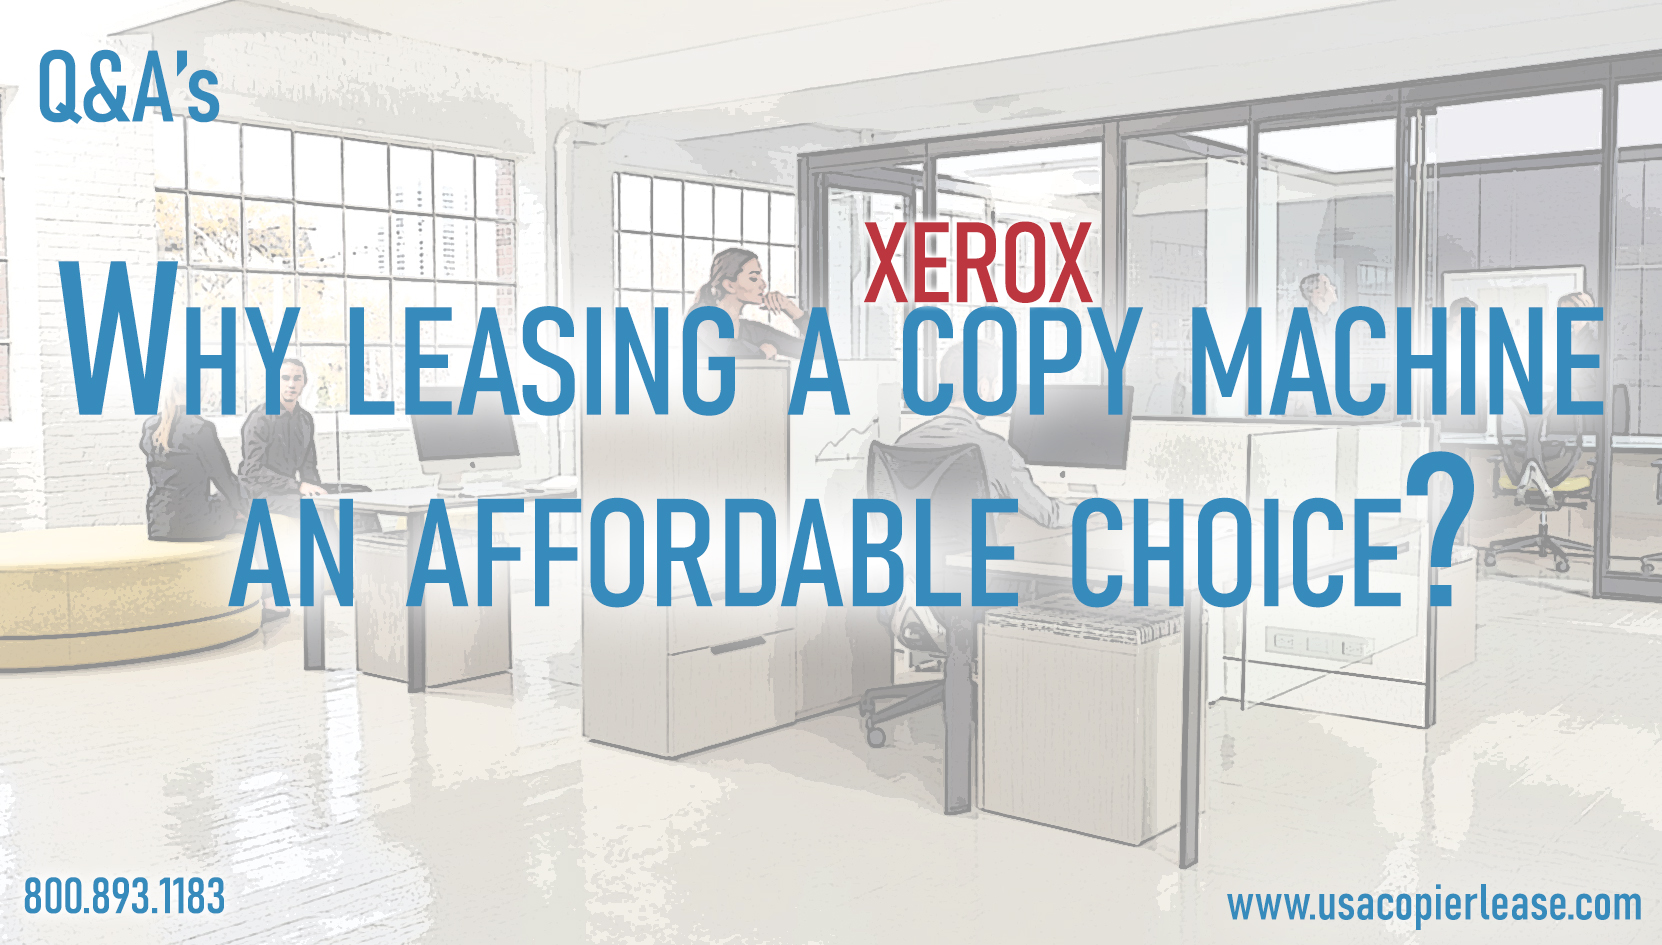 Why leasing a copy machine is an affordable choice?